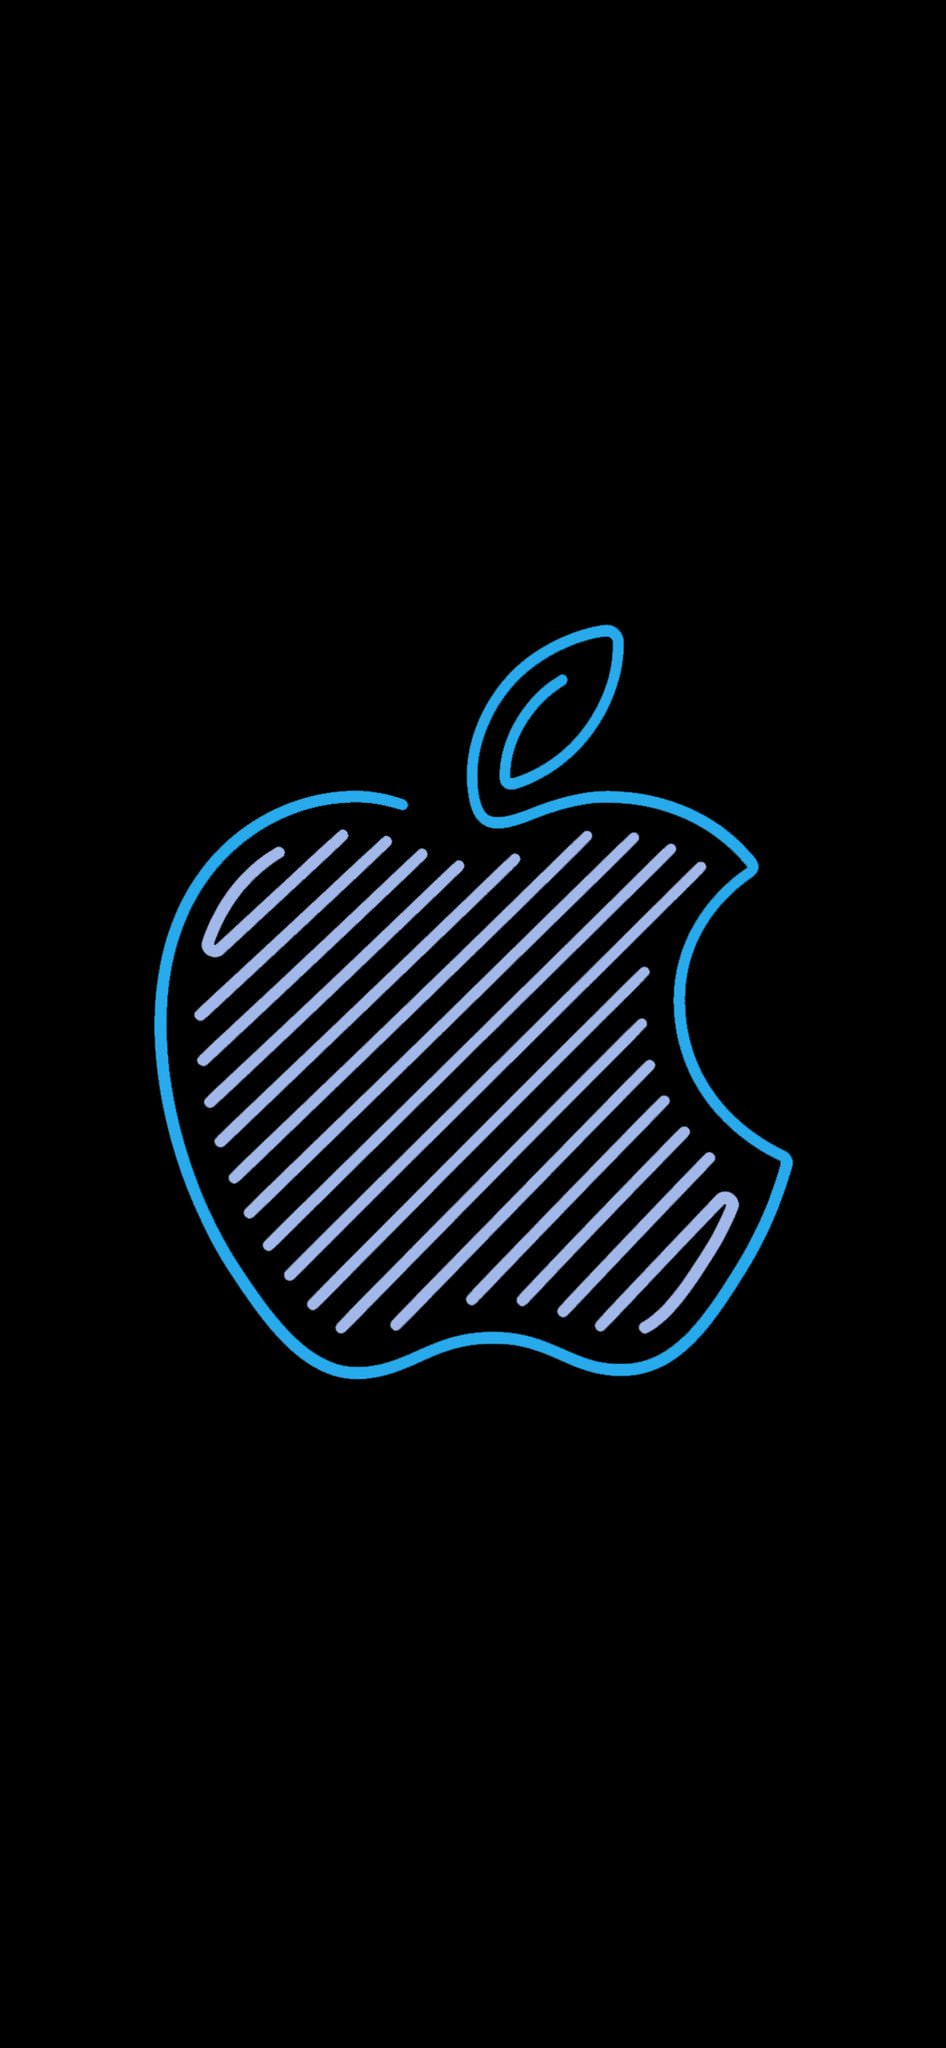 Apple Tokyo Store Inspired Neon Wallpapers For iPhone and Mac